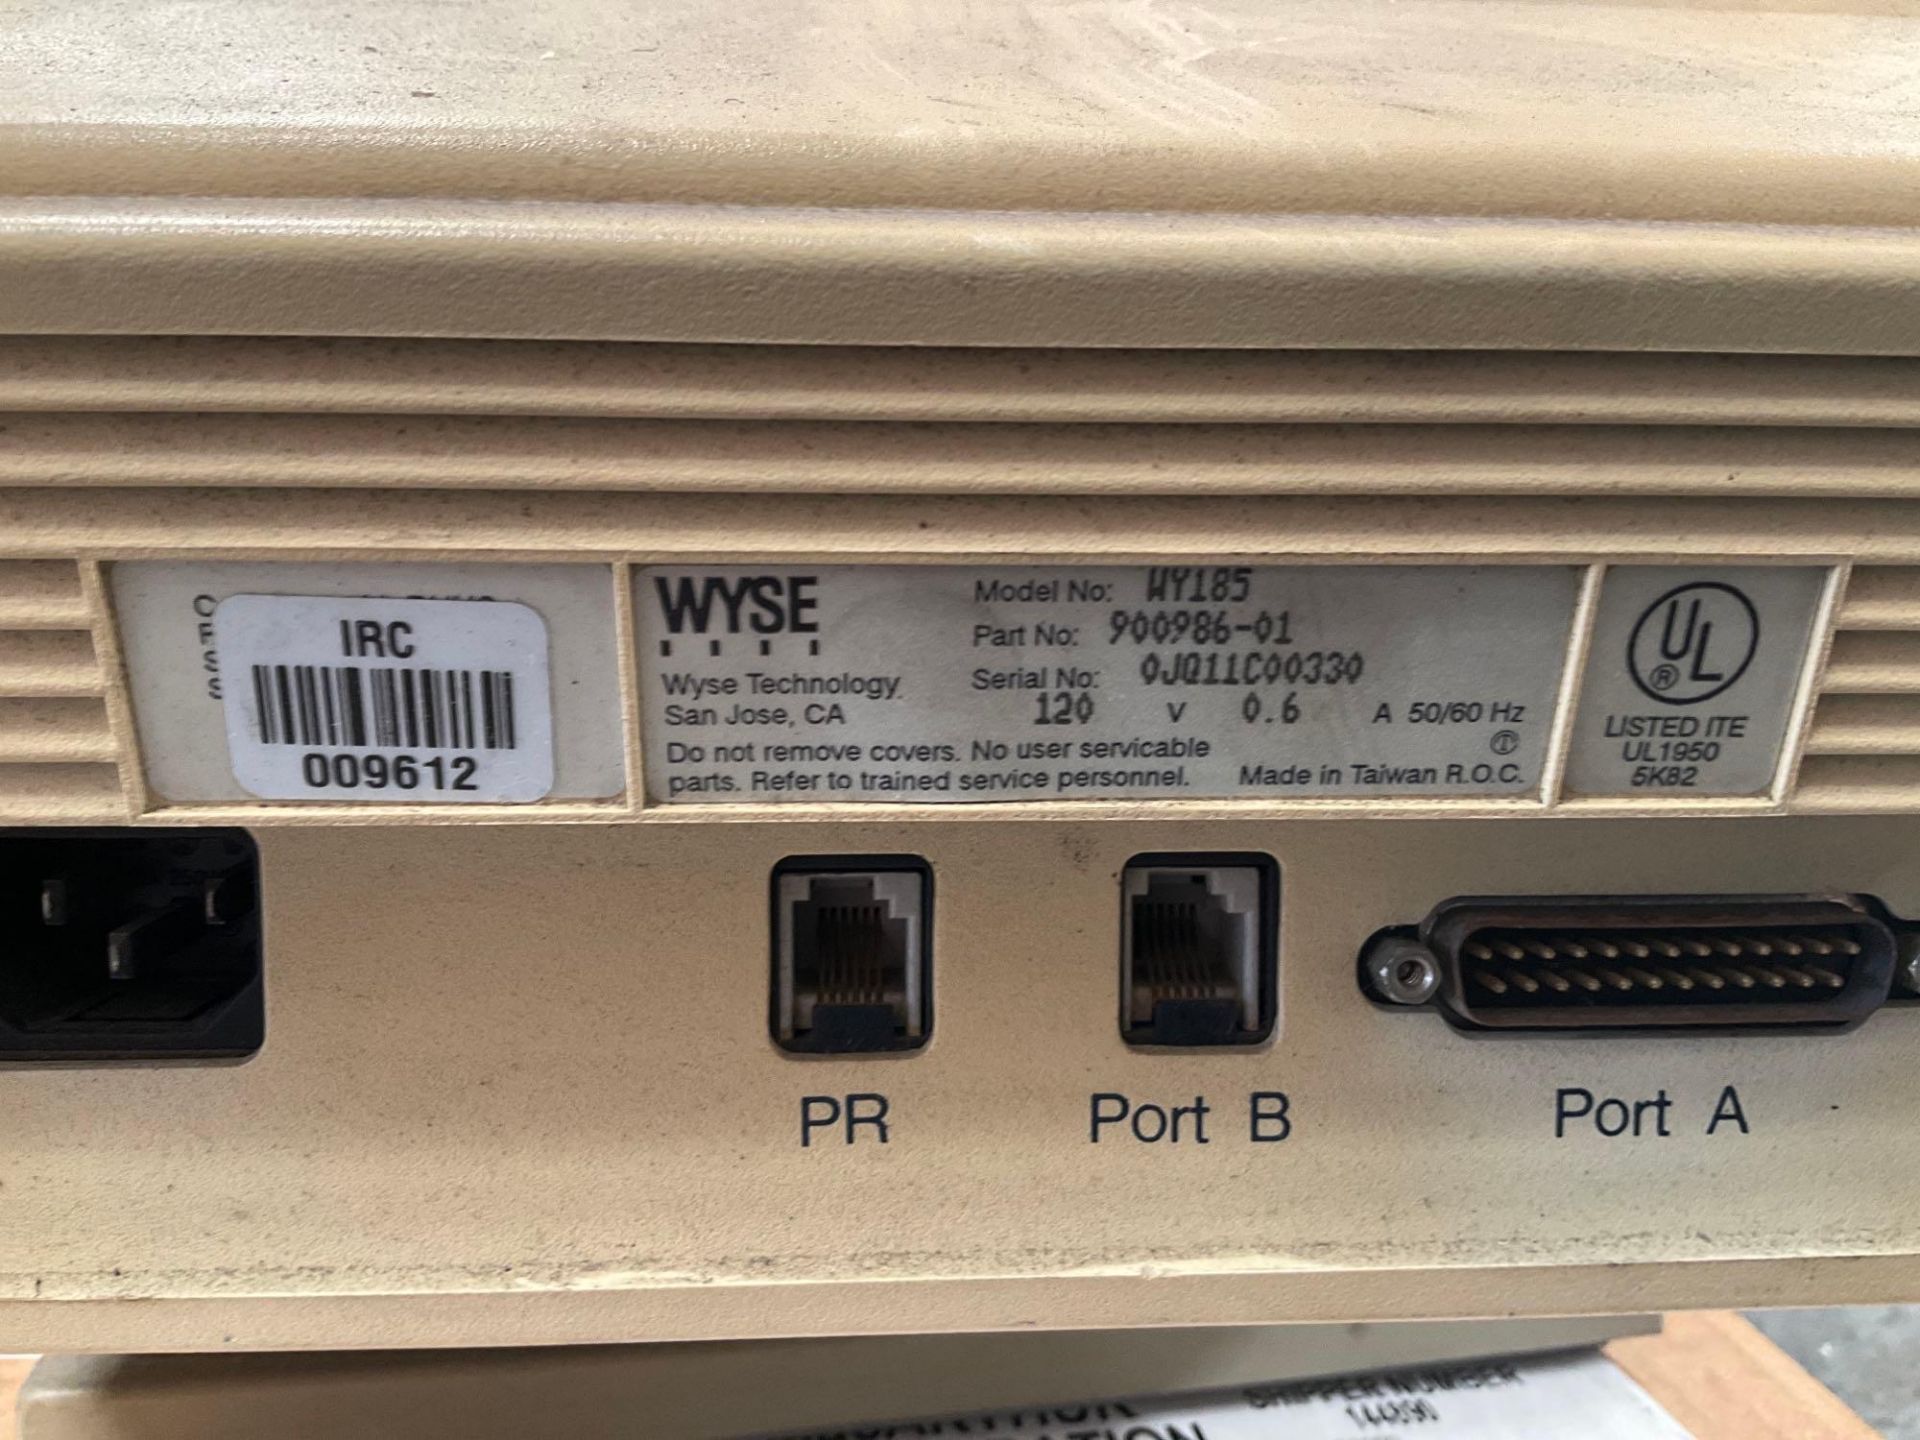 WYSE COMPUTER MONITOR MODEL WY185 PART NUMBER 900986-01, WYSE COMPUTER MONITOR MODEL WY150 PART - Image 5 of 16